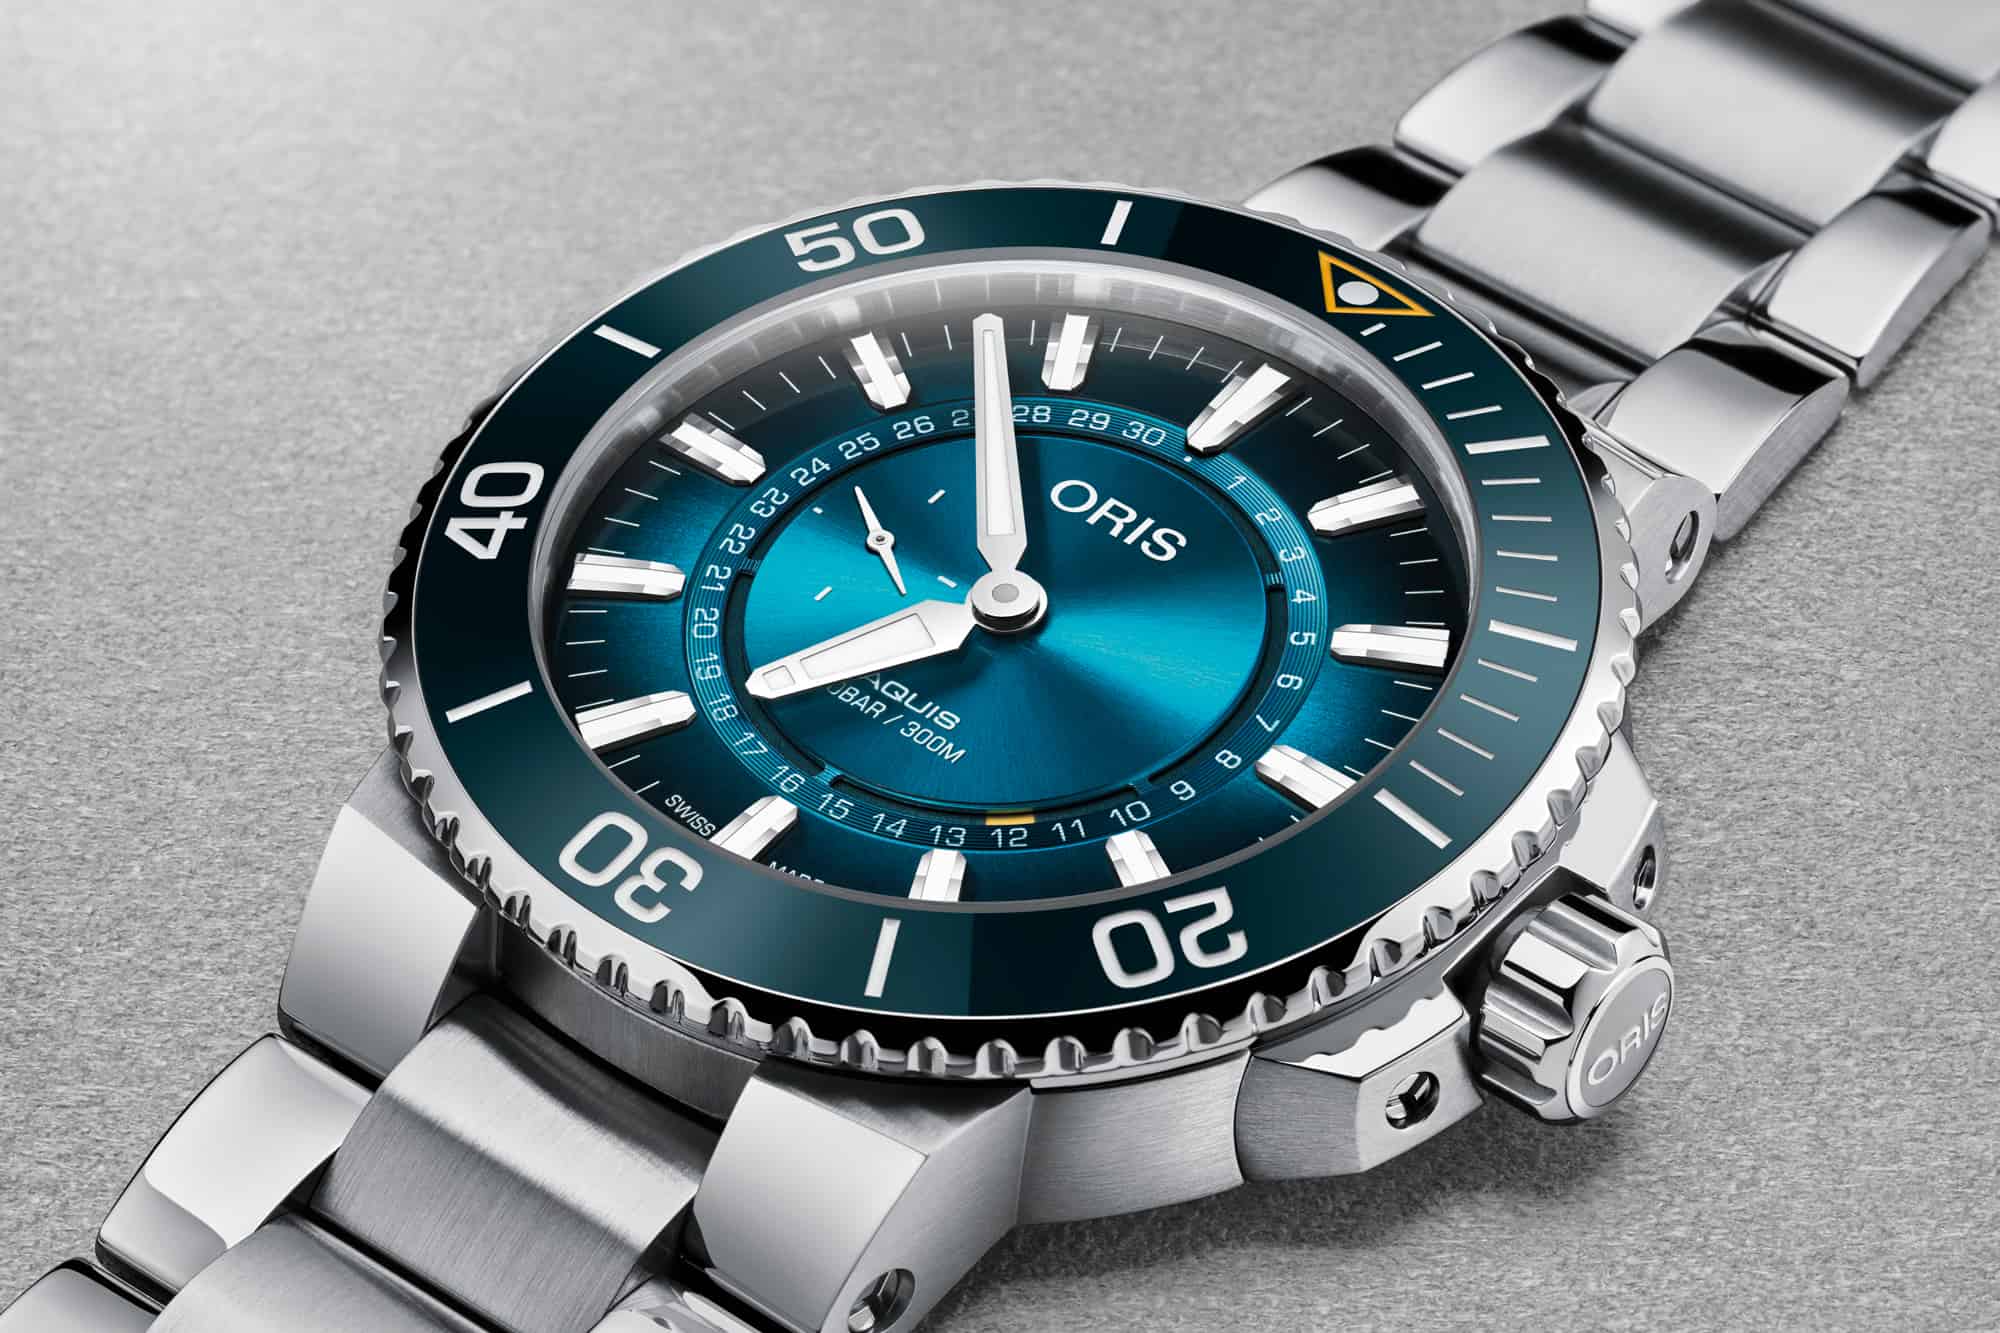 Baselworld 2019 Introducing the Oris Great Barrier Reef Limited